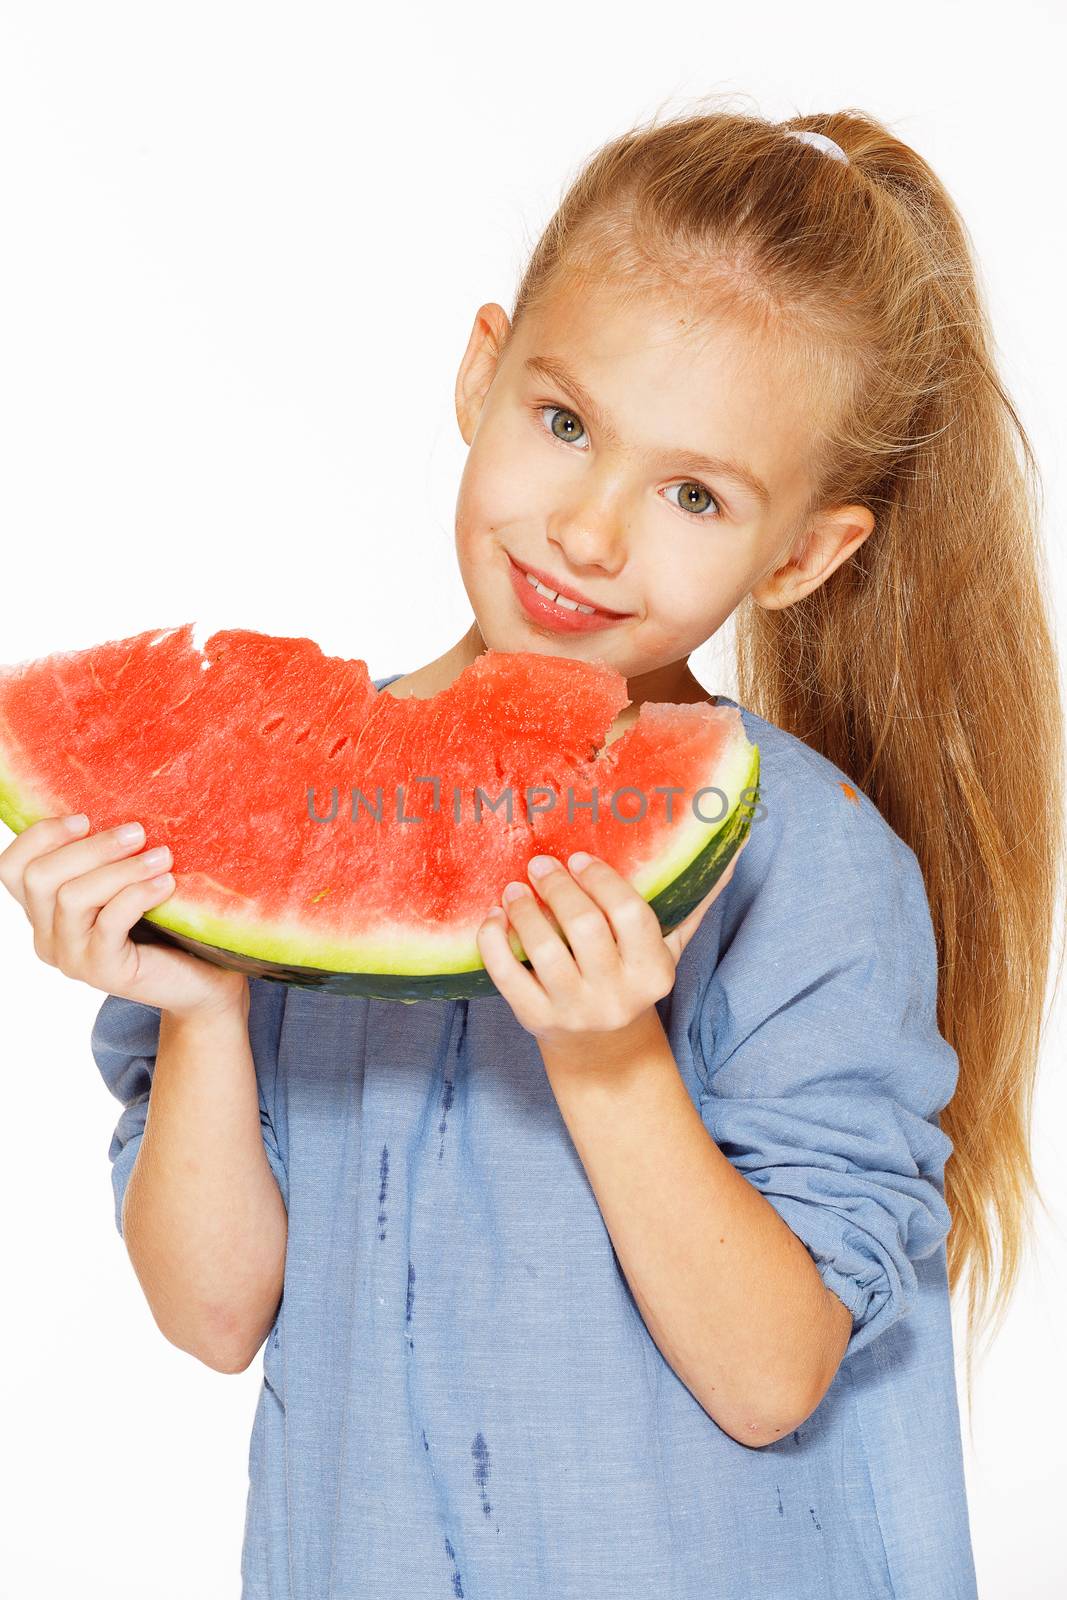 Little girl with watermelon by gorov108